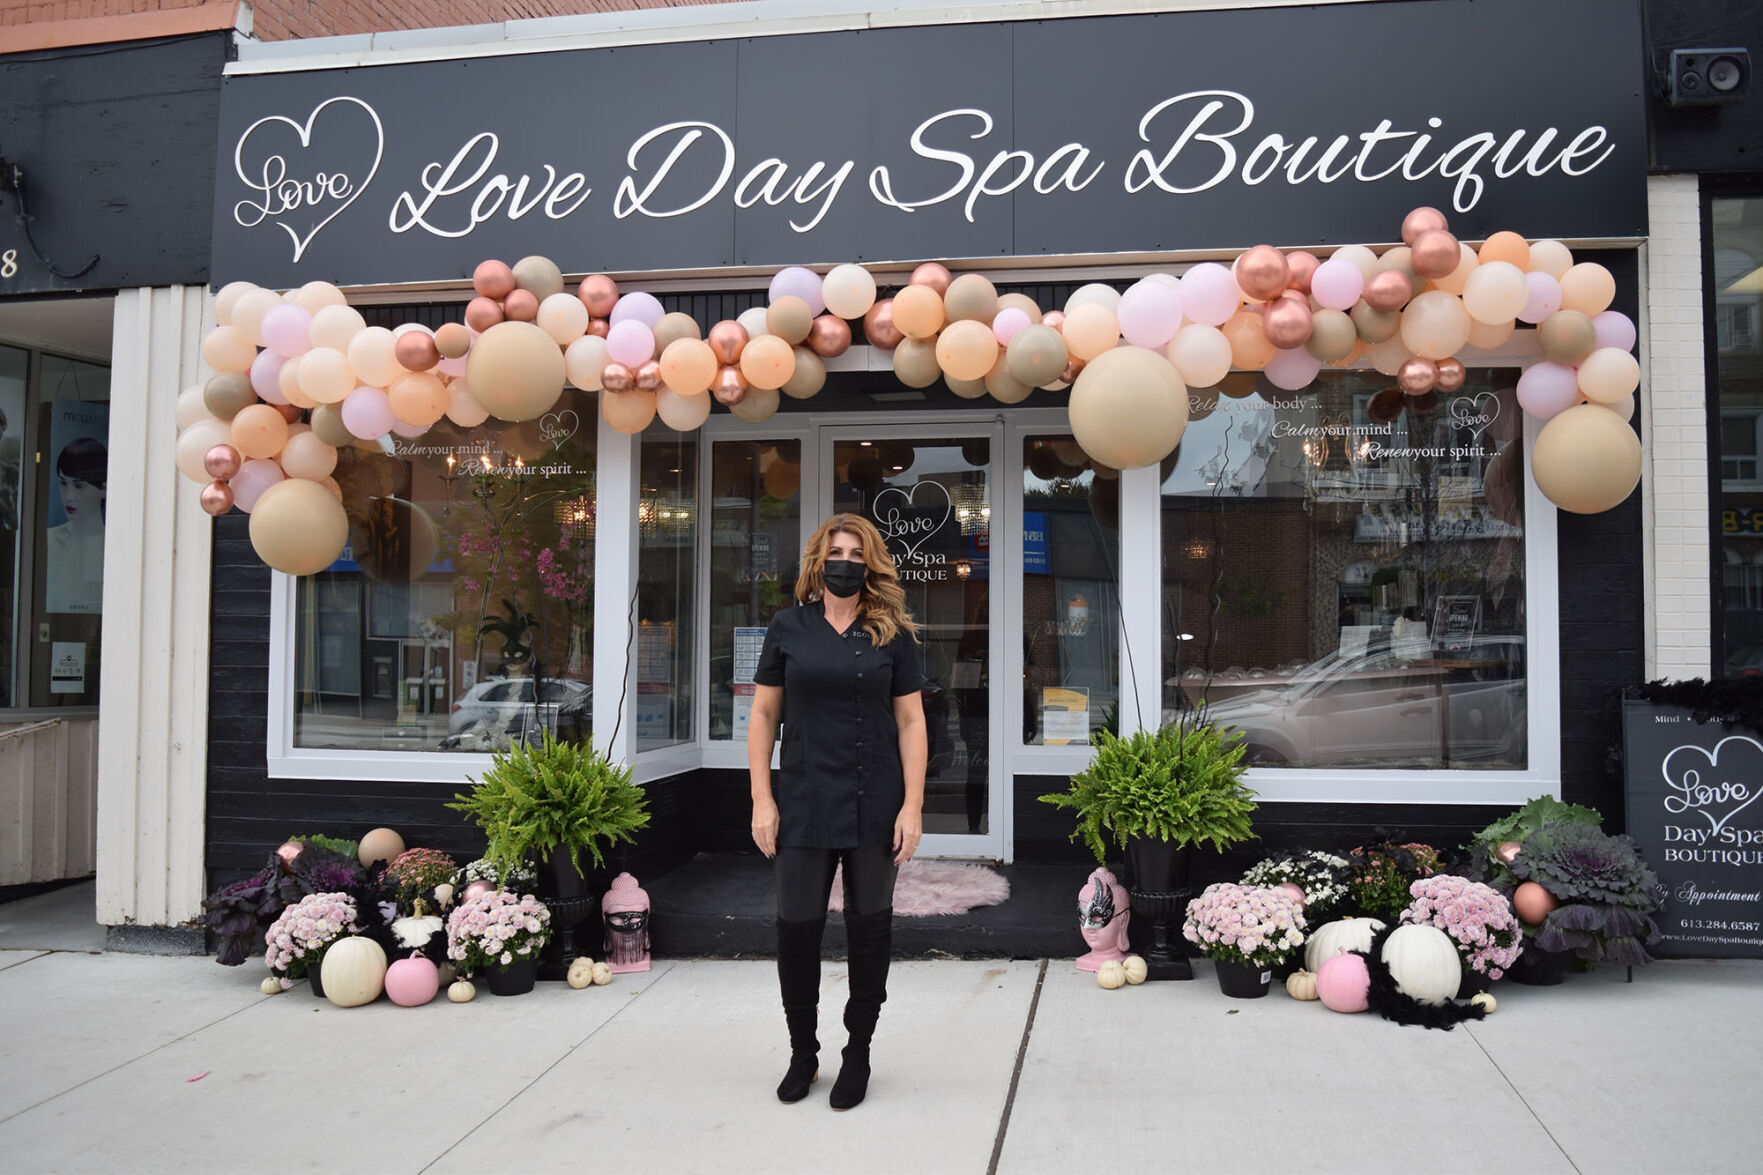 Love Day Spa Boutique makes its grand entrance in Smiths Falls